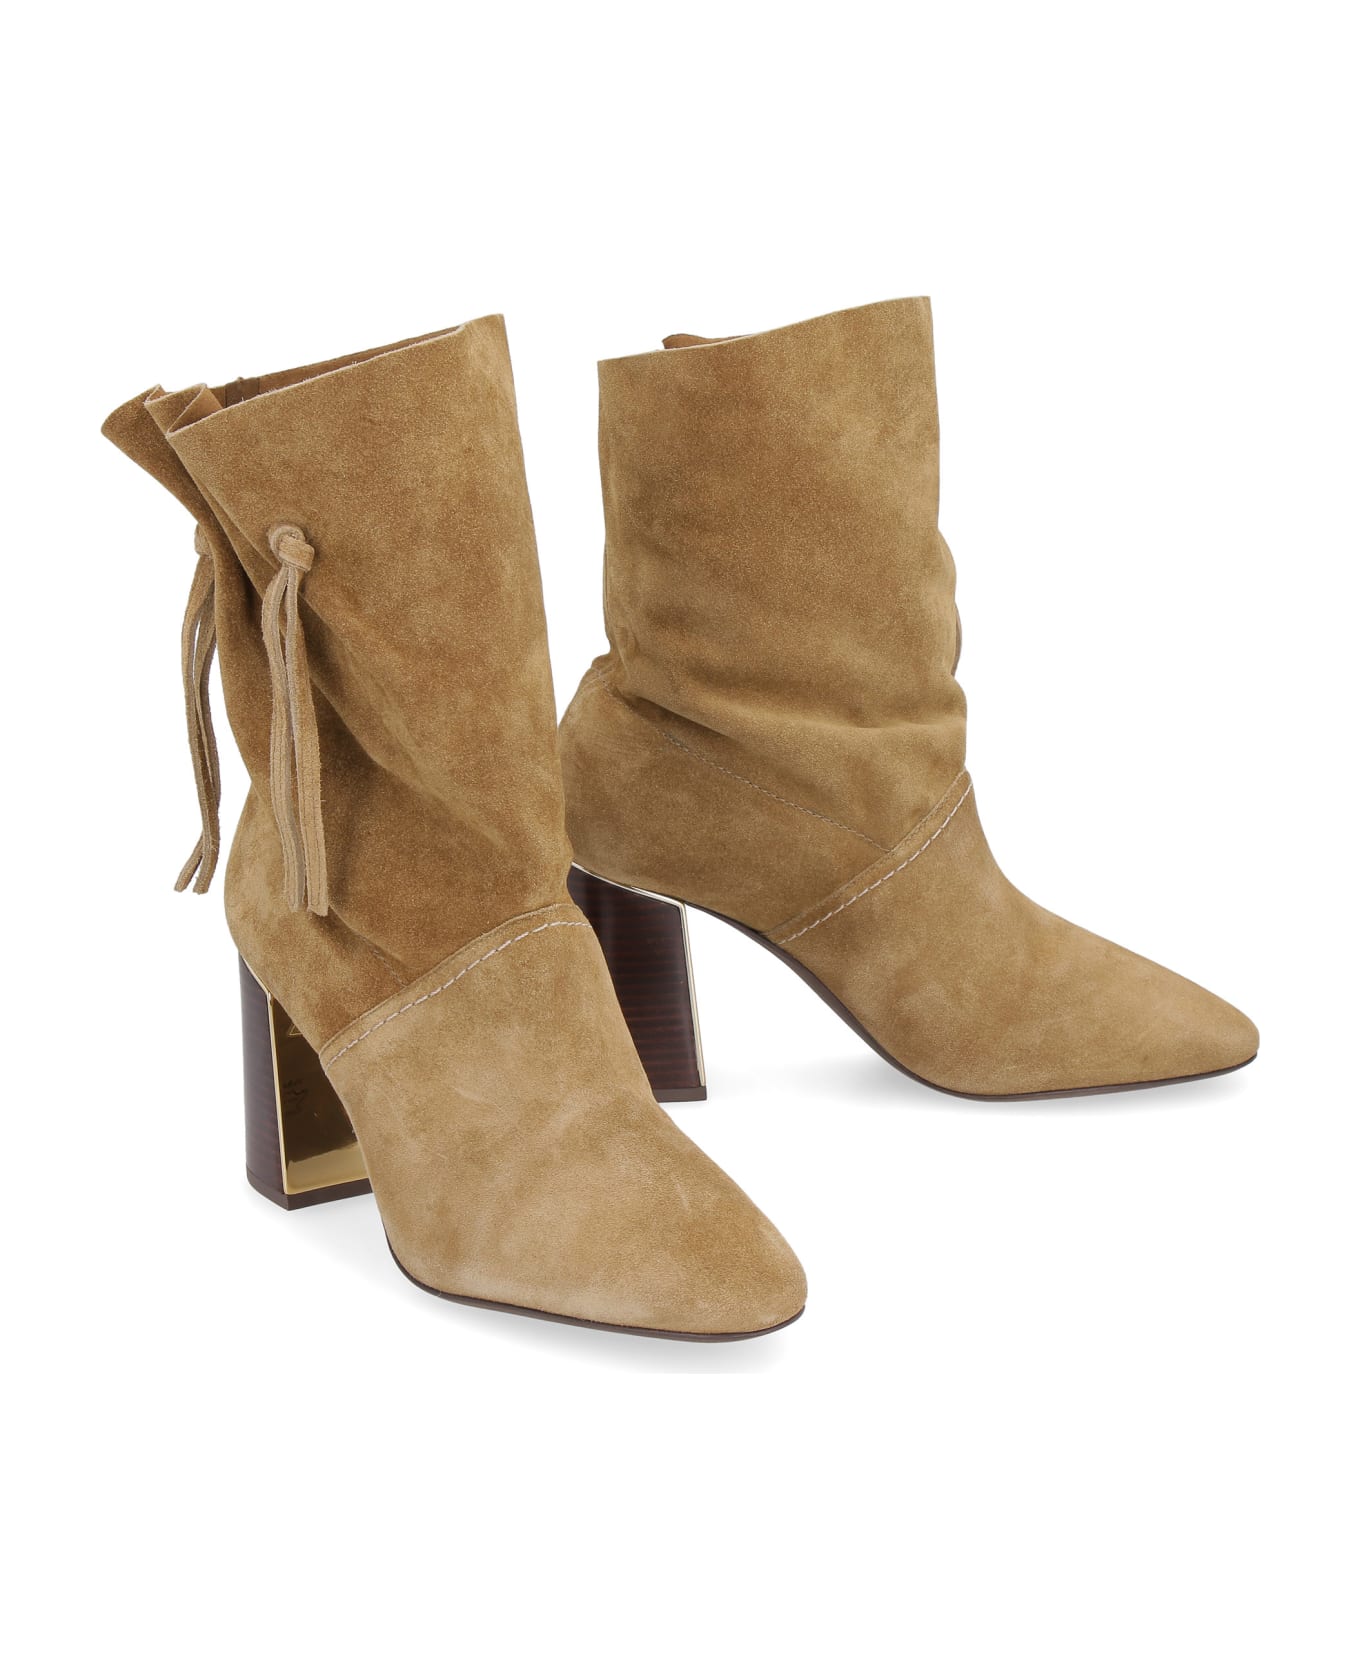 Tory Burch Gigi Suede Ankle Boots - Beige